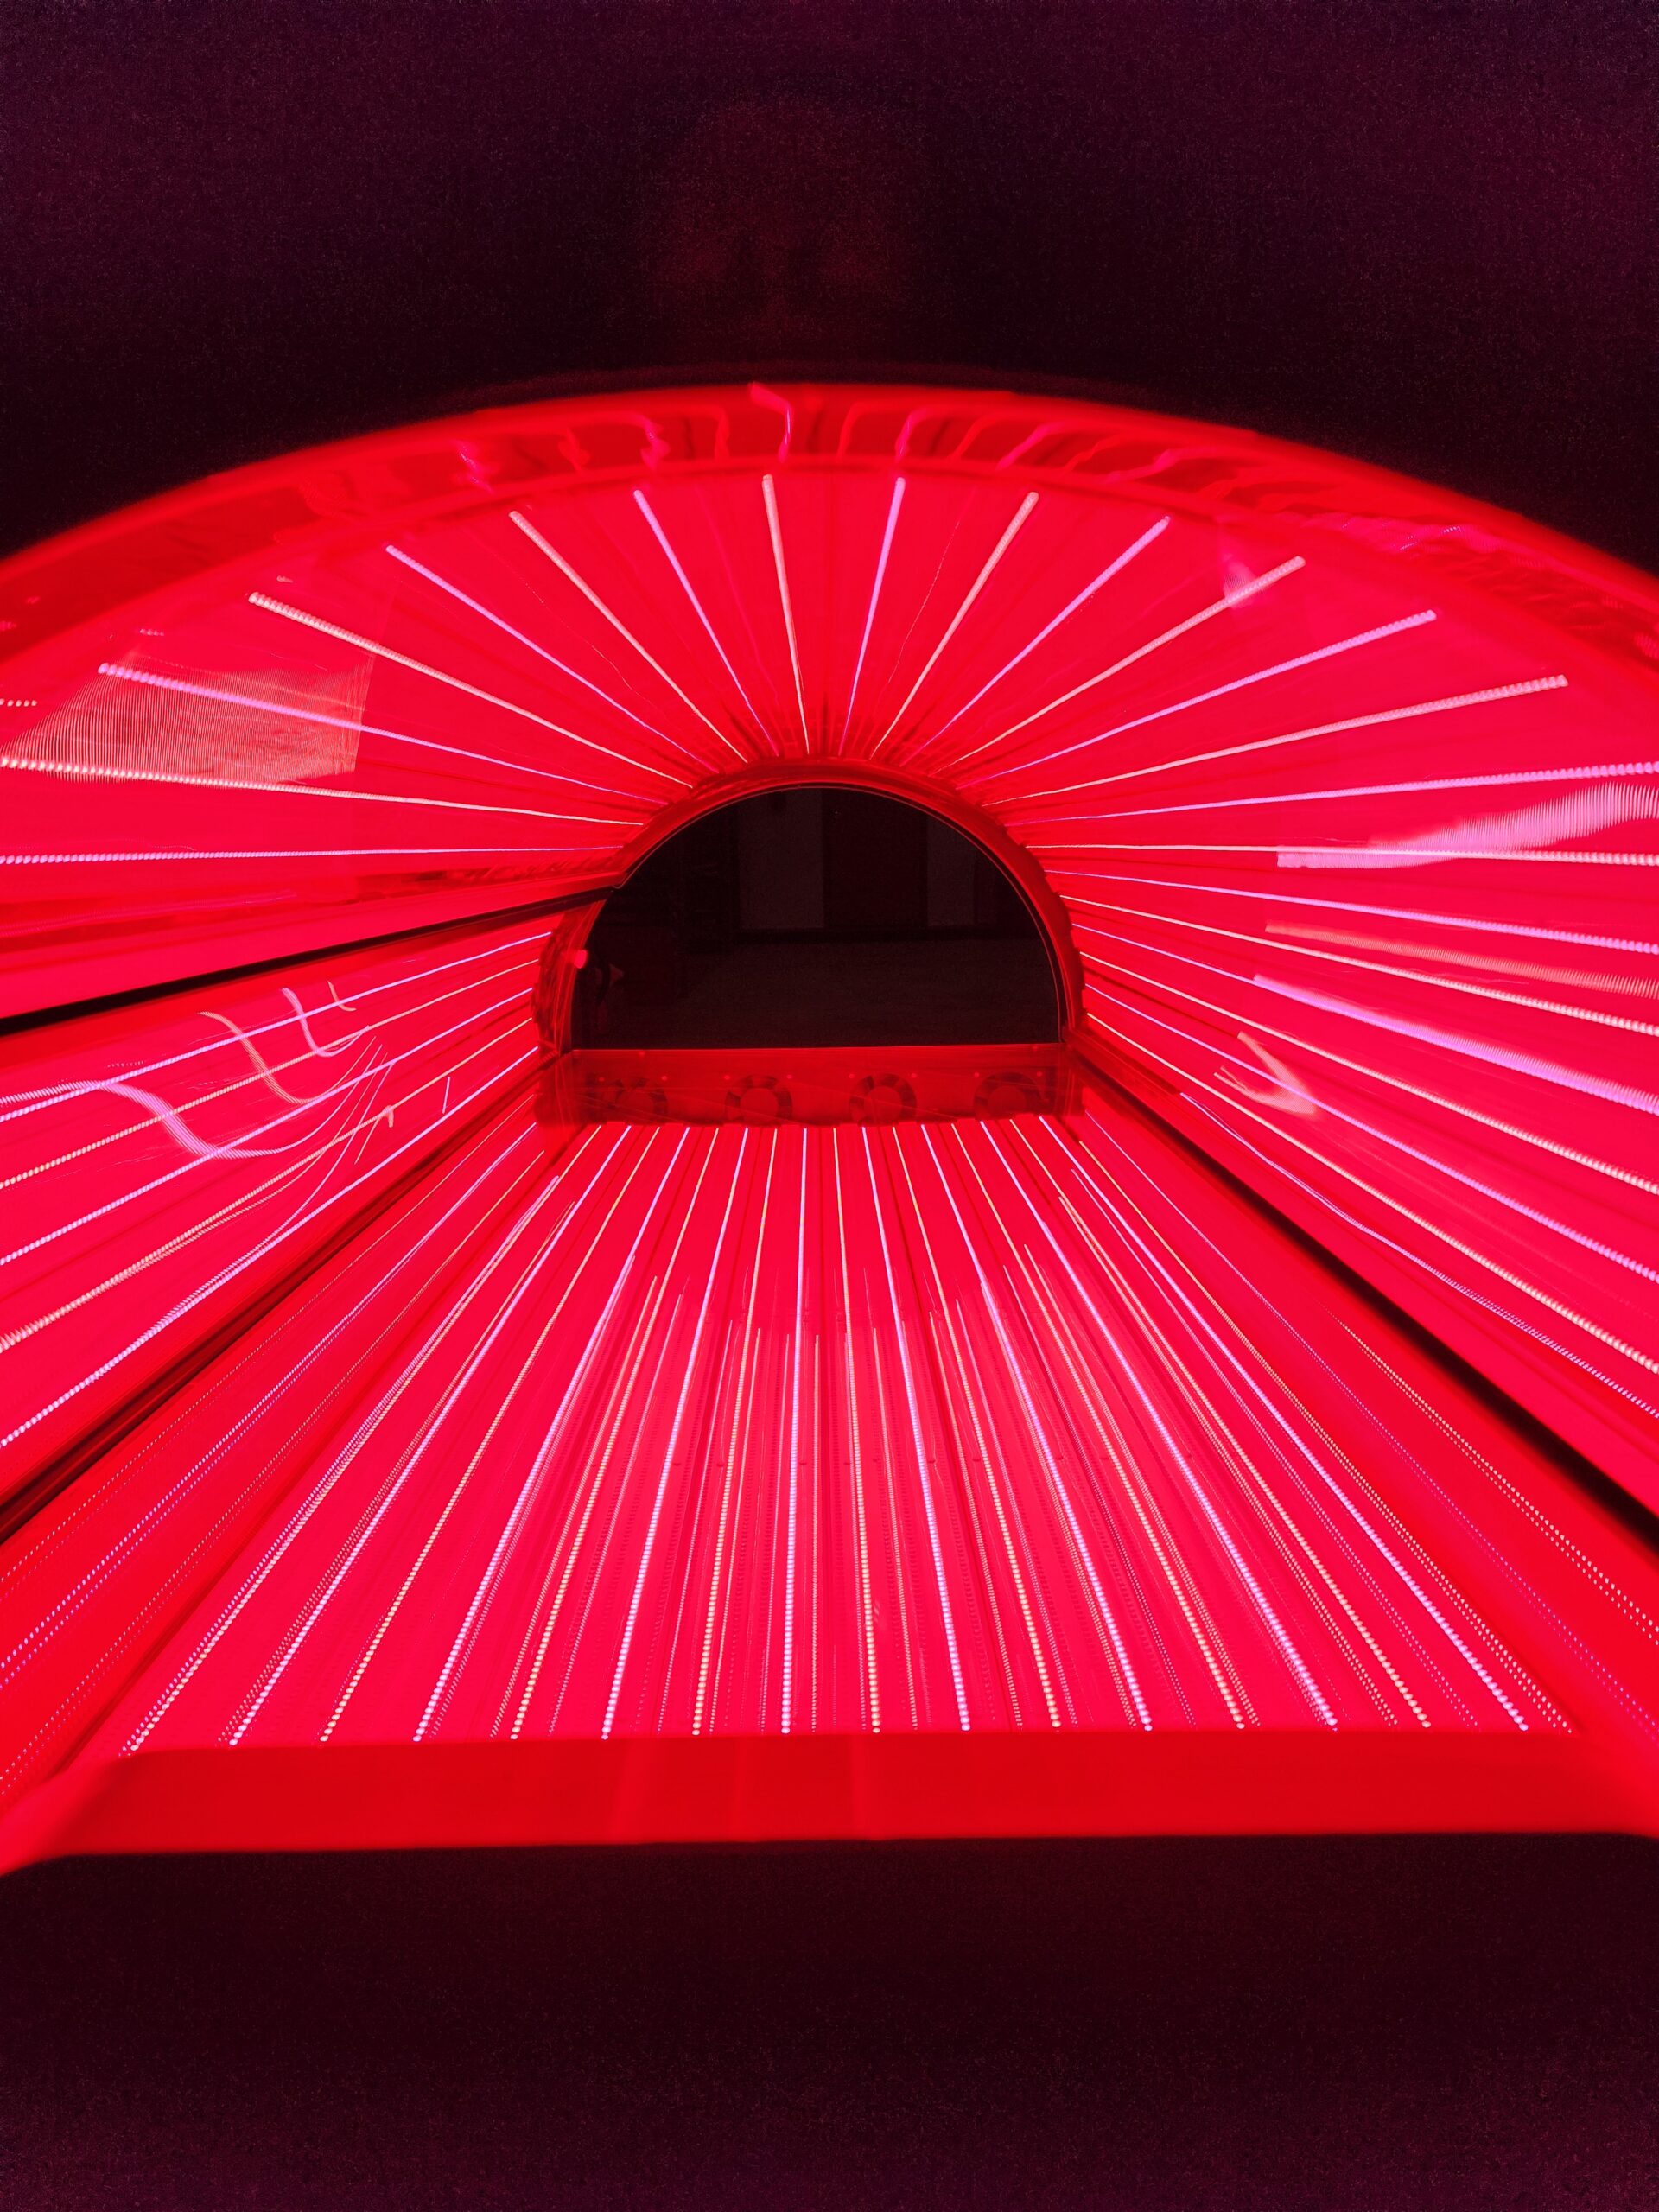 Red Light Bed for Depression and Anxiety